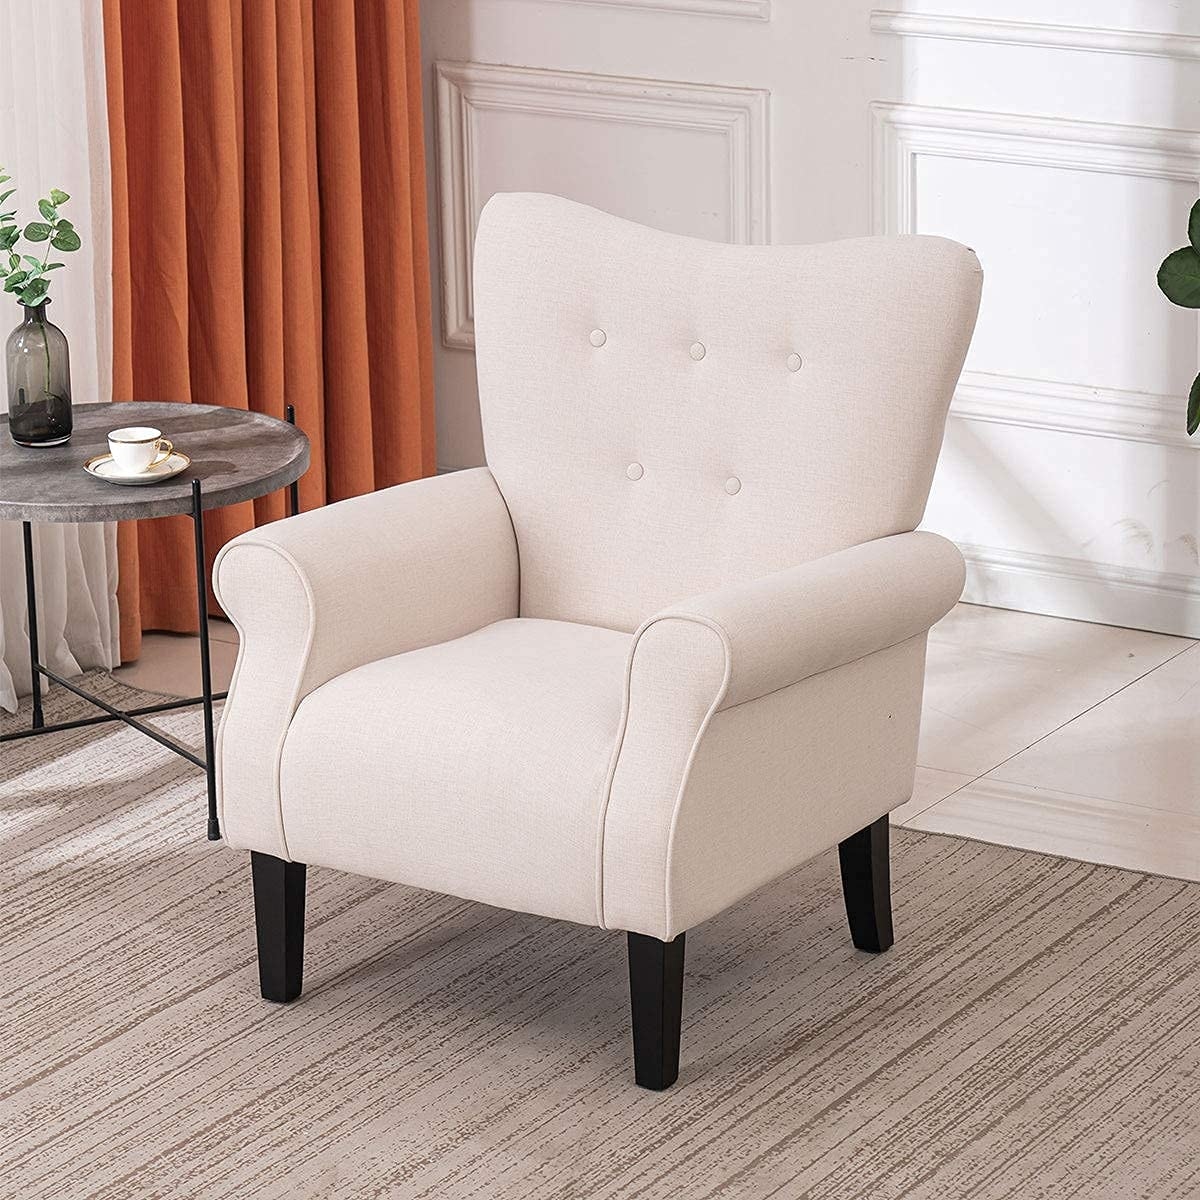 Erommy Modern Accent Chair, High Back Armchair, Upholstered Fabric Button Single Sofa with Wooden Legs for Living Room